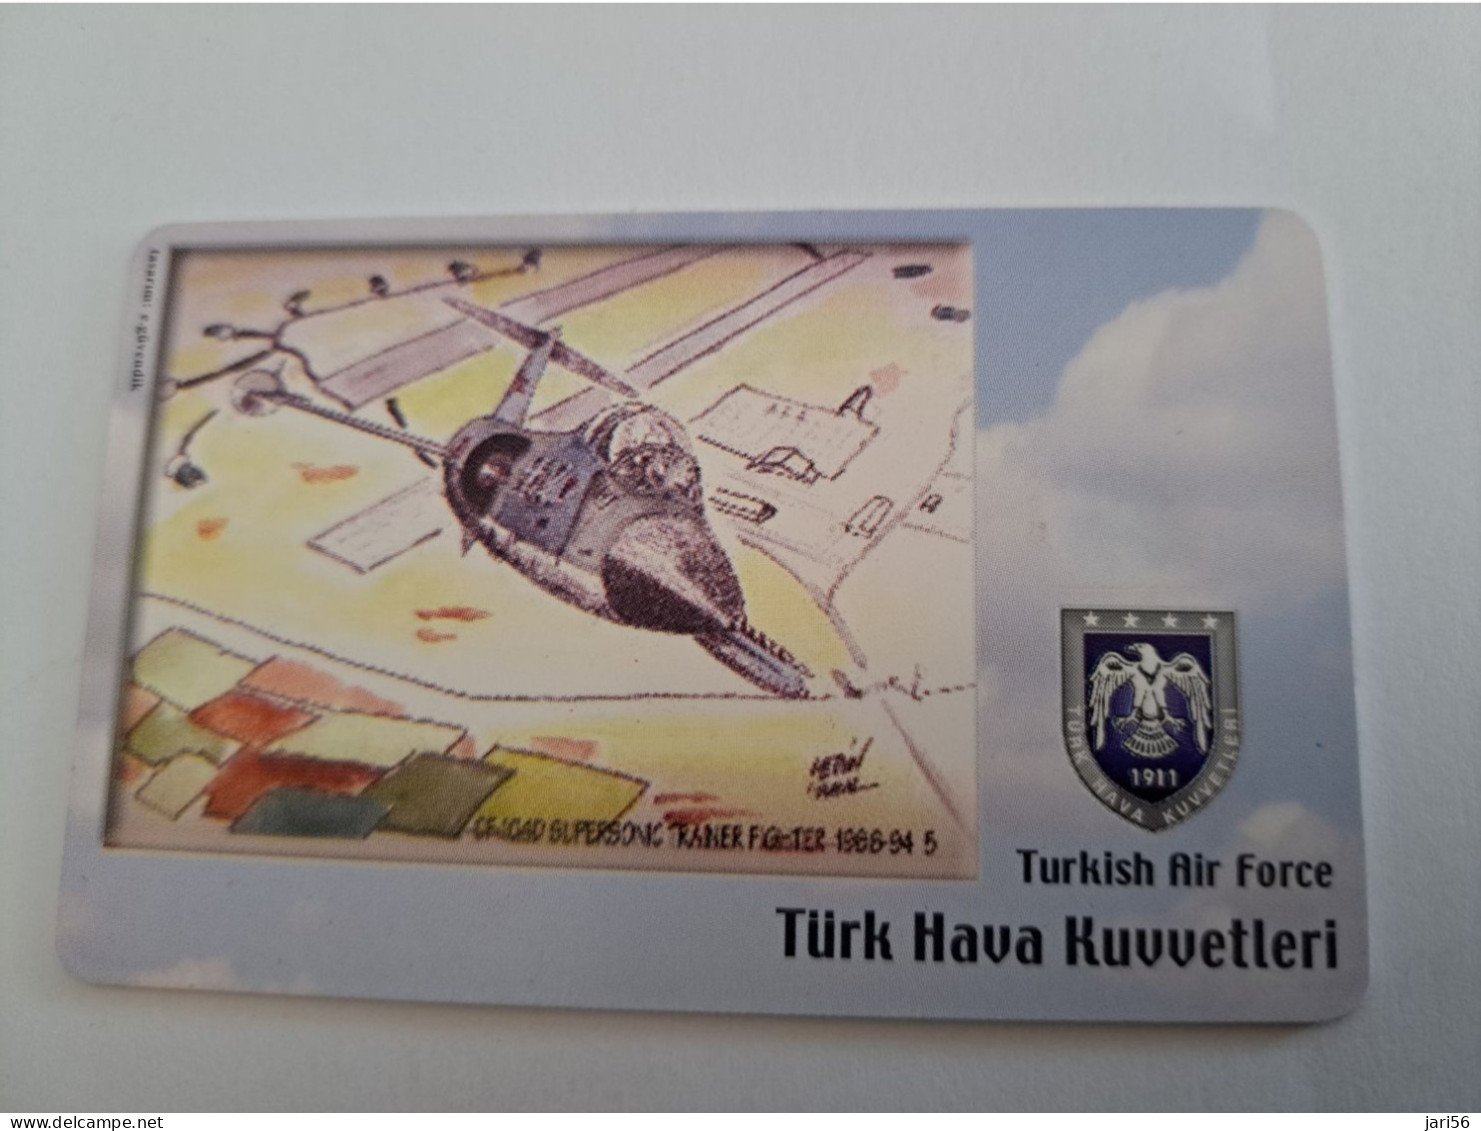 TURKIJE / 50 UNITS/ CHIPCARD/ TURKISH AIR FORCE  / DIFFERENT PLANES /        Fine Used Card  **15410** - Turquie